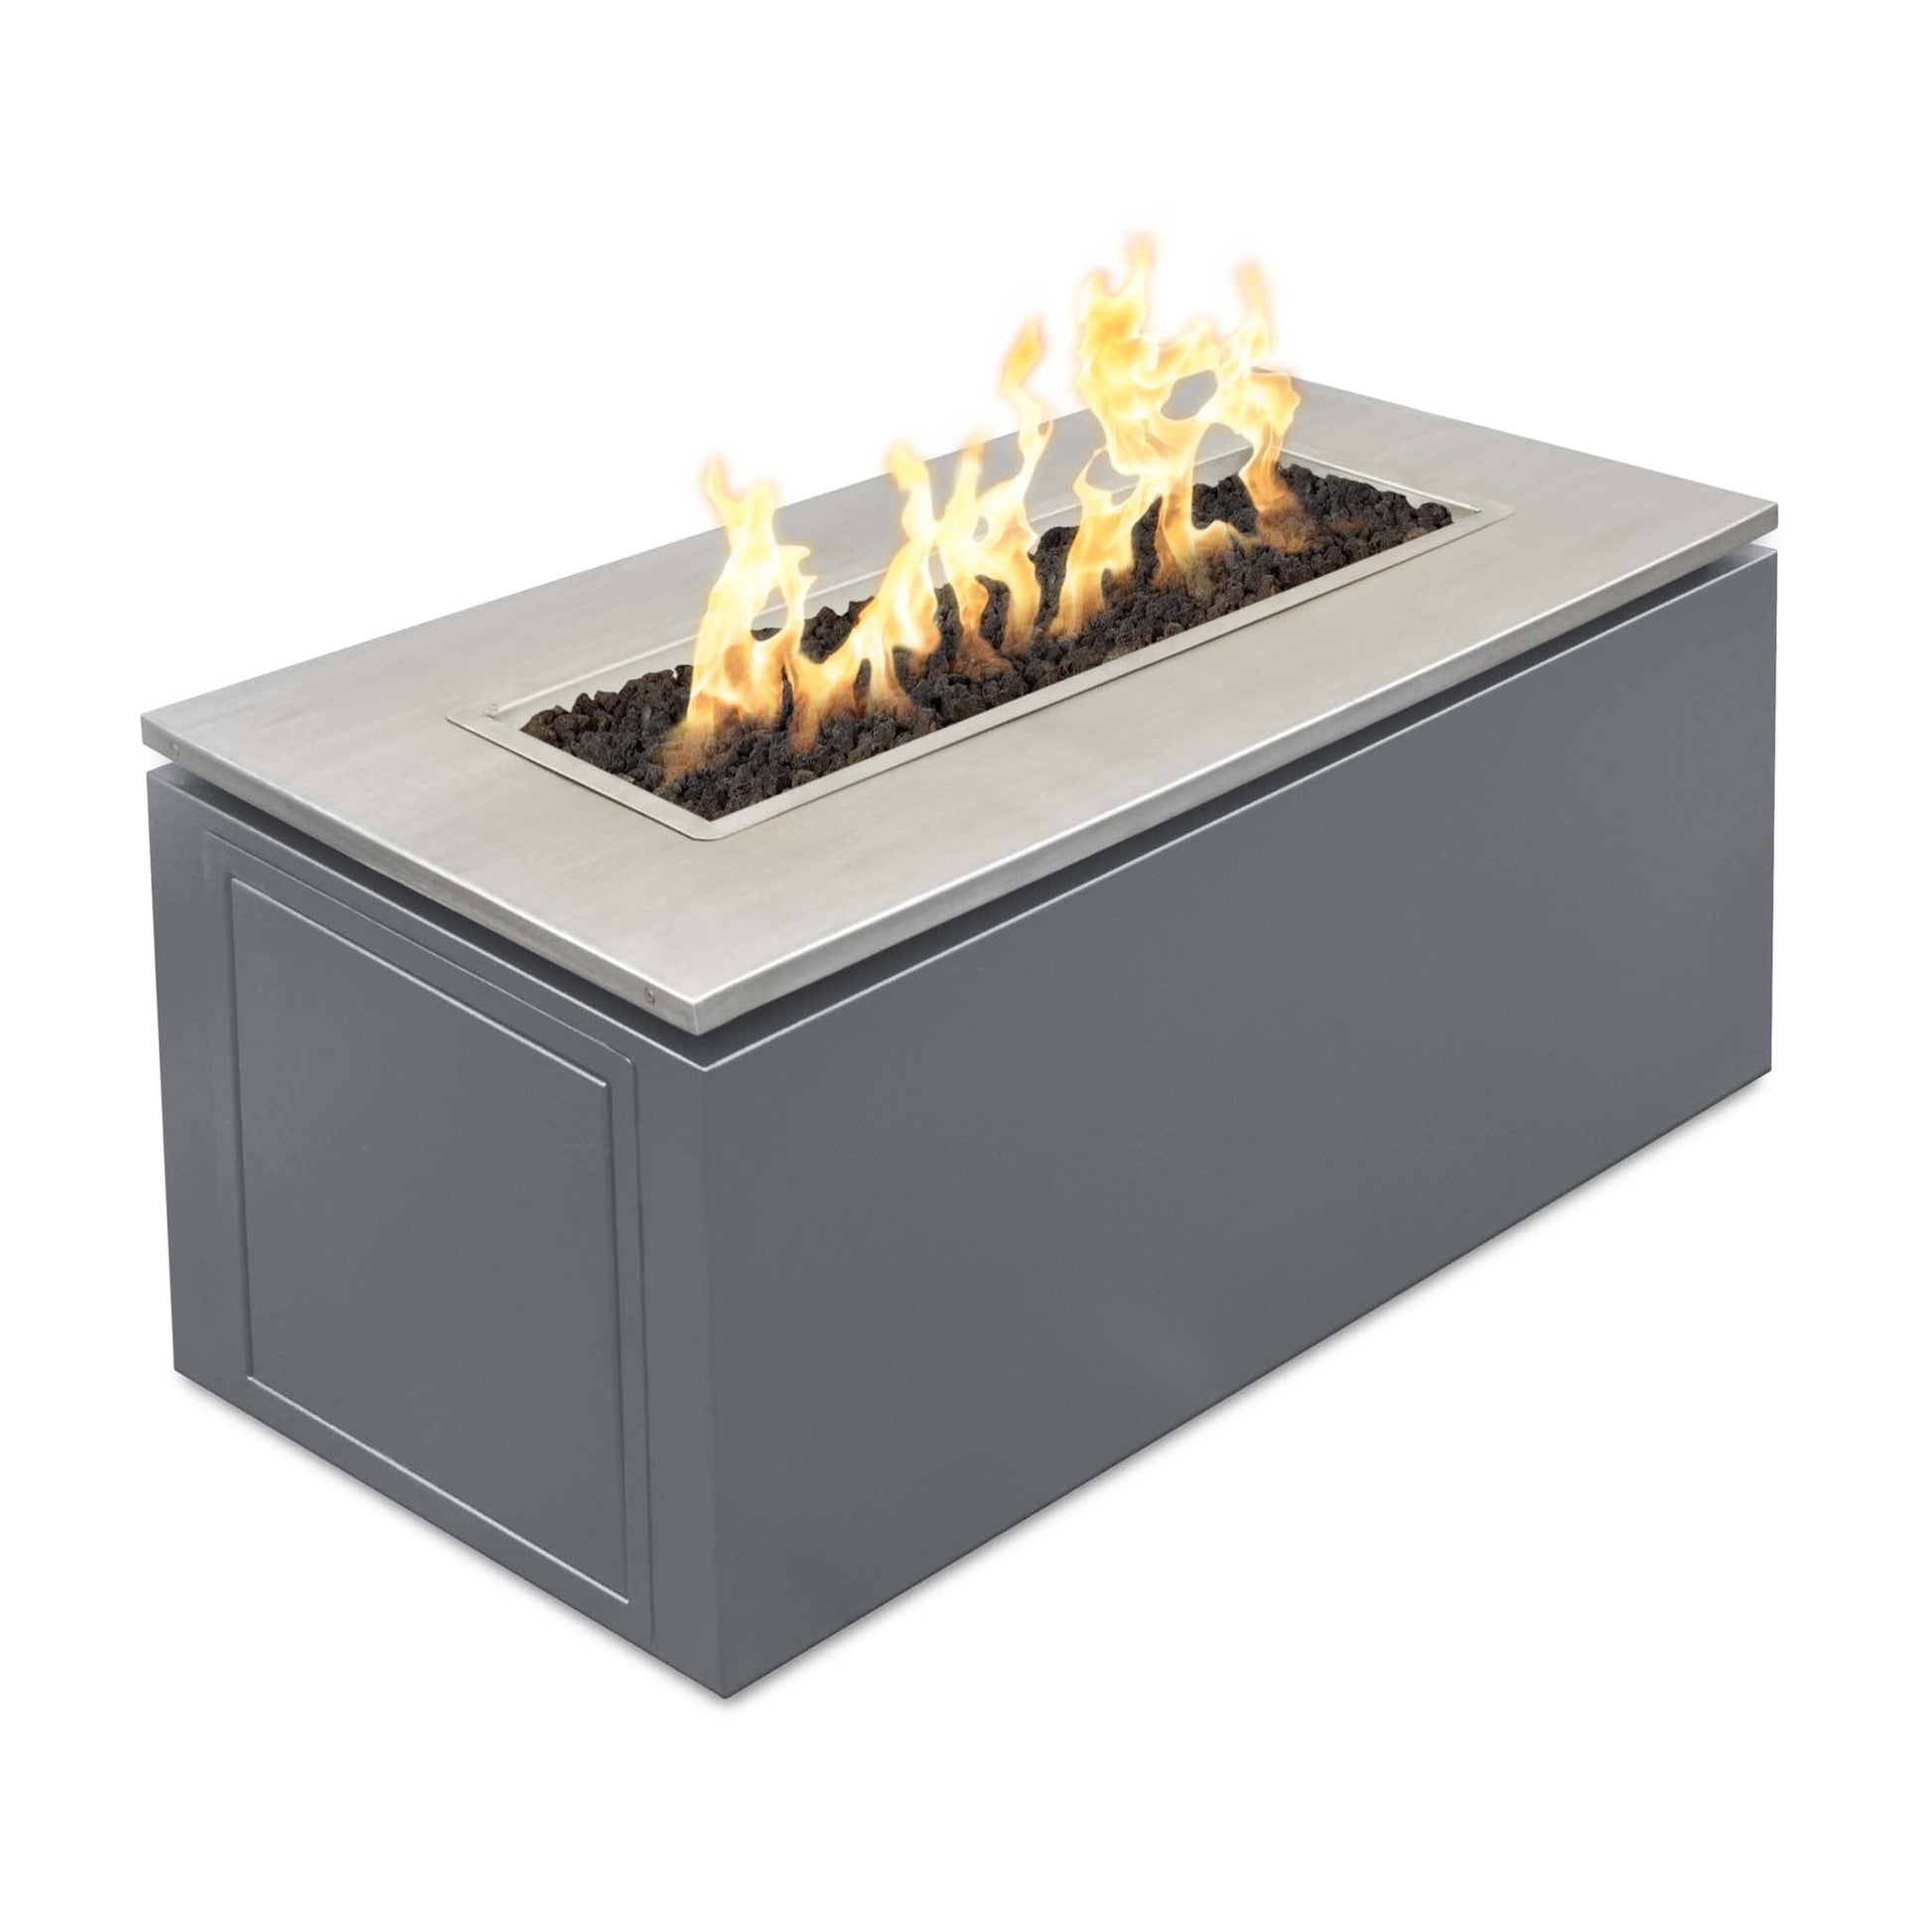 The Outdoor Plus Rectangular Merona 46" Hammered Copper Liquid Propane Fire Pit with 110V Electronic Ignition